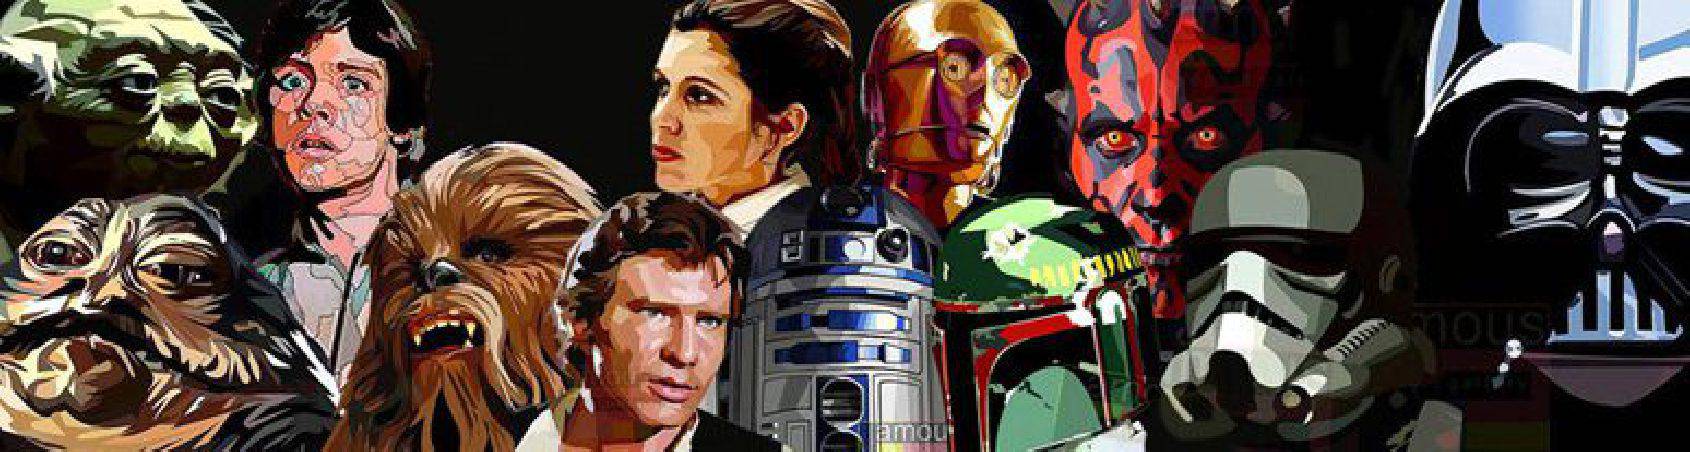 pictures and panoramic scenes Pop Art Star Wars saga characters-To buy